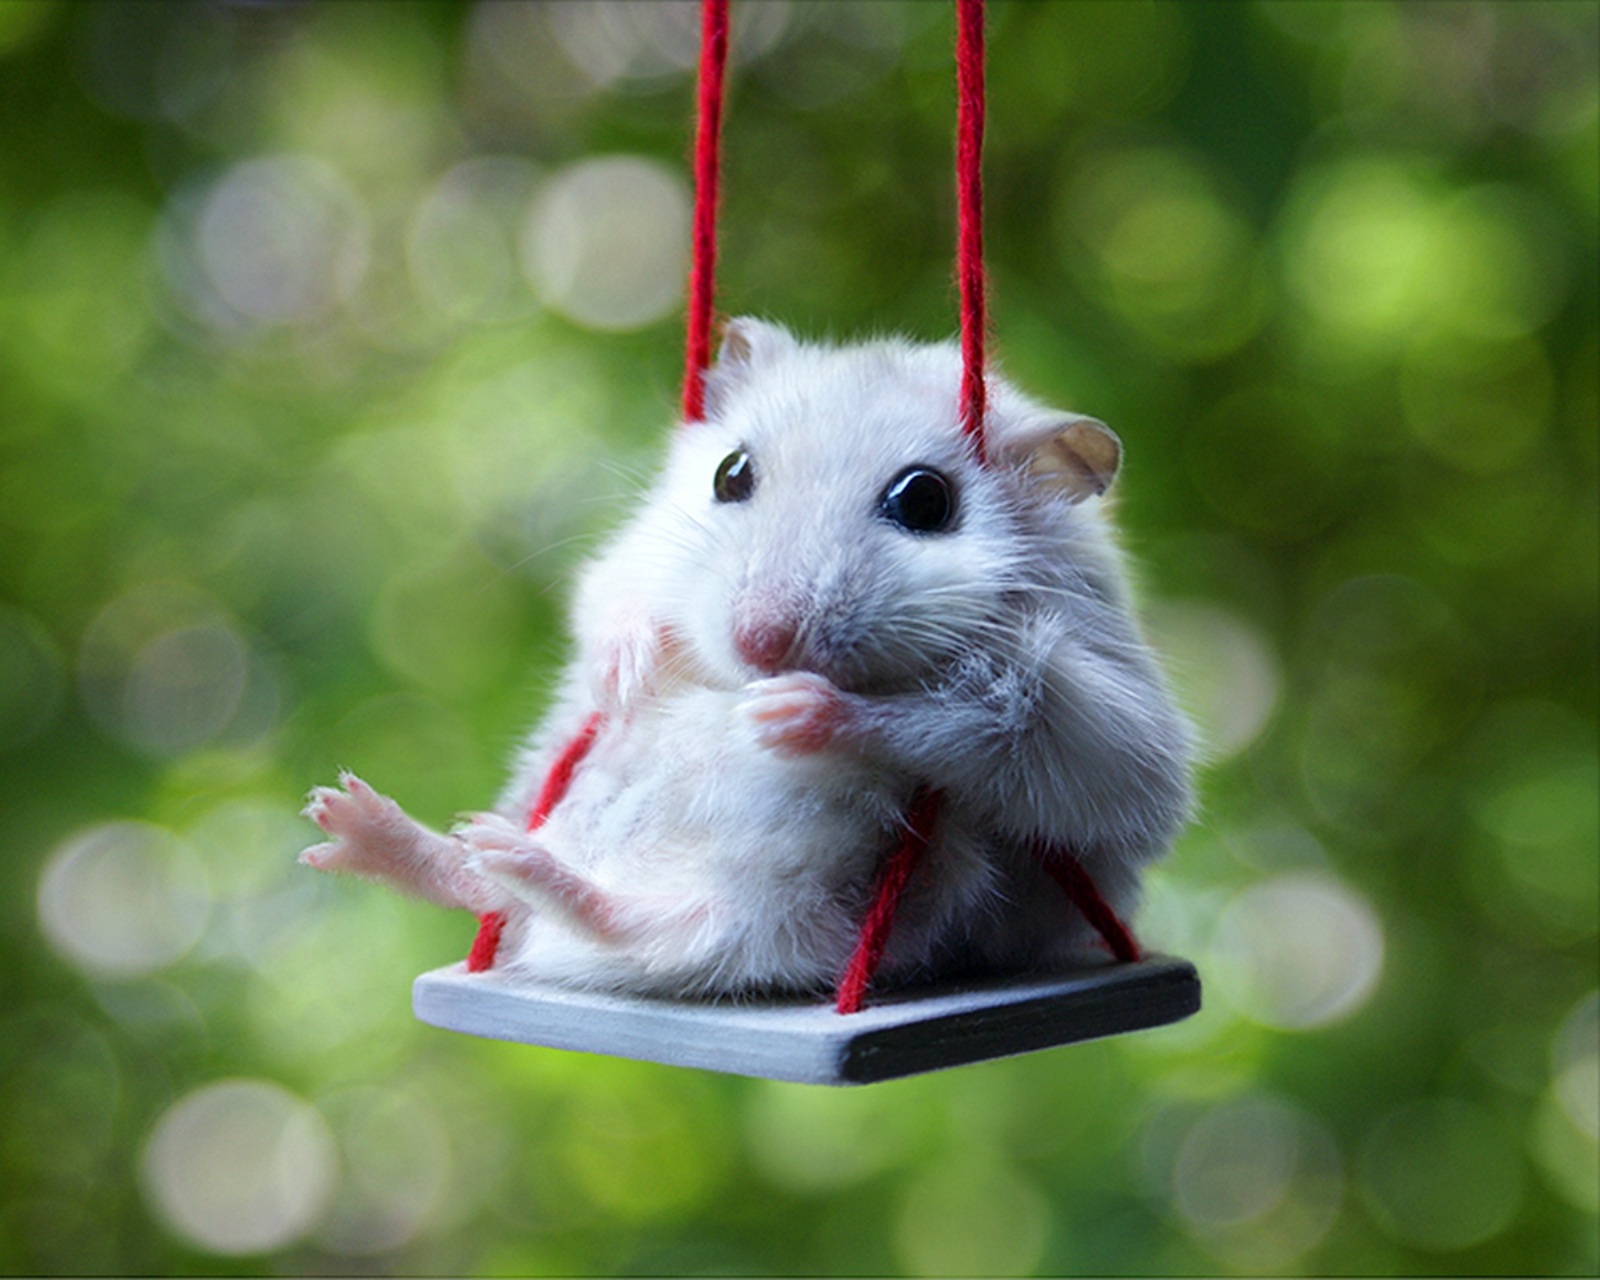 Free download Cute Hamsters Wallpaper cute white hamster wallpaper computer [1600x1280] for your Desktop, Mobile & Tablet. Explore Hamster Wallpaper Desktop. Cute Hamster Wallpaper, Hamsters Wallpaper, Free Hamster Desktop Wallpaper